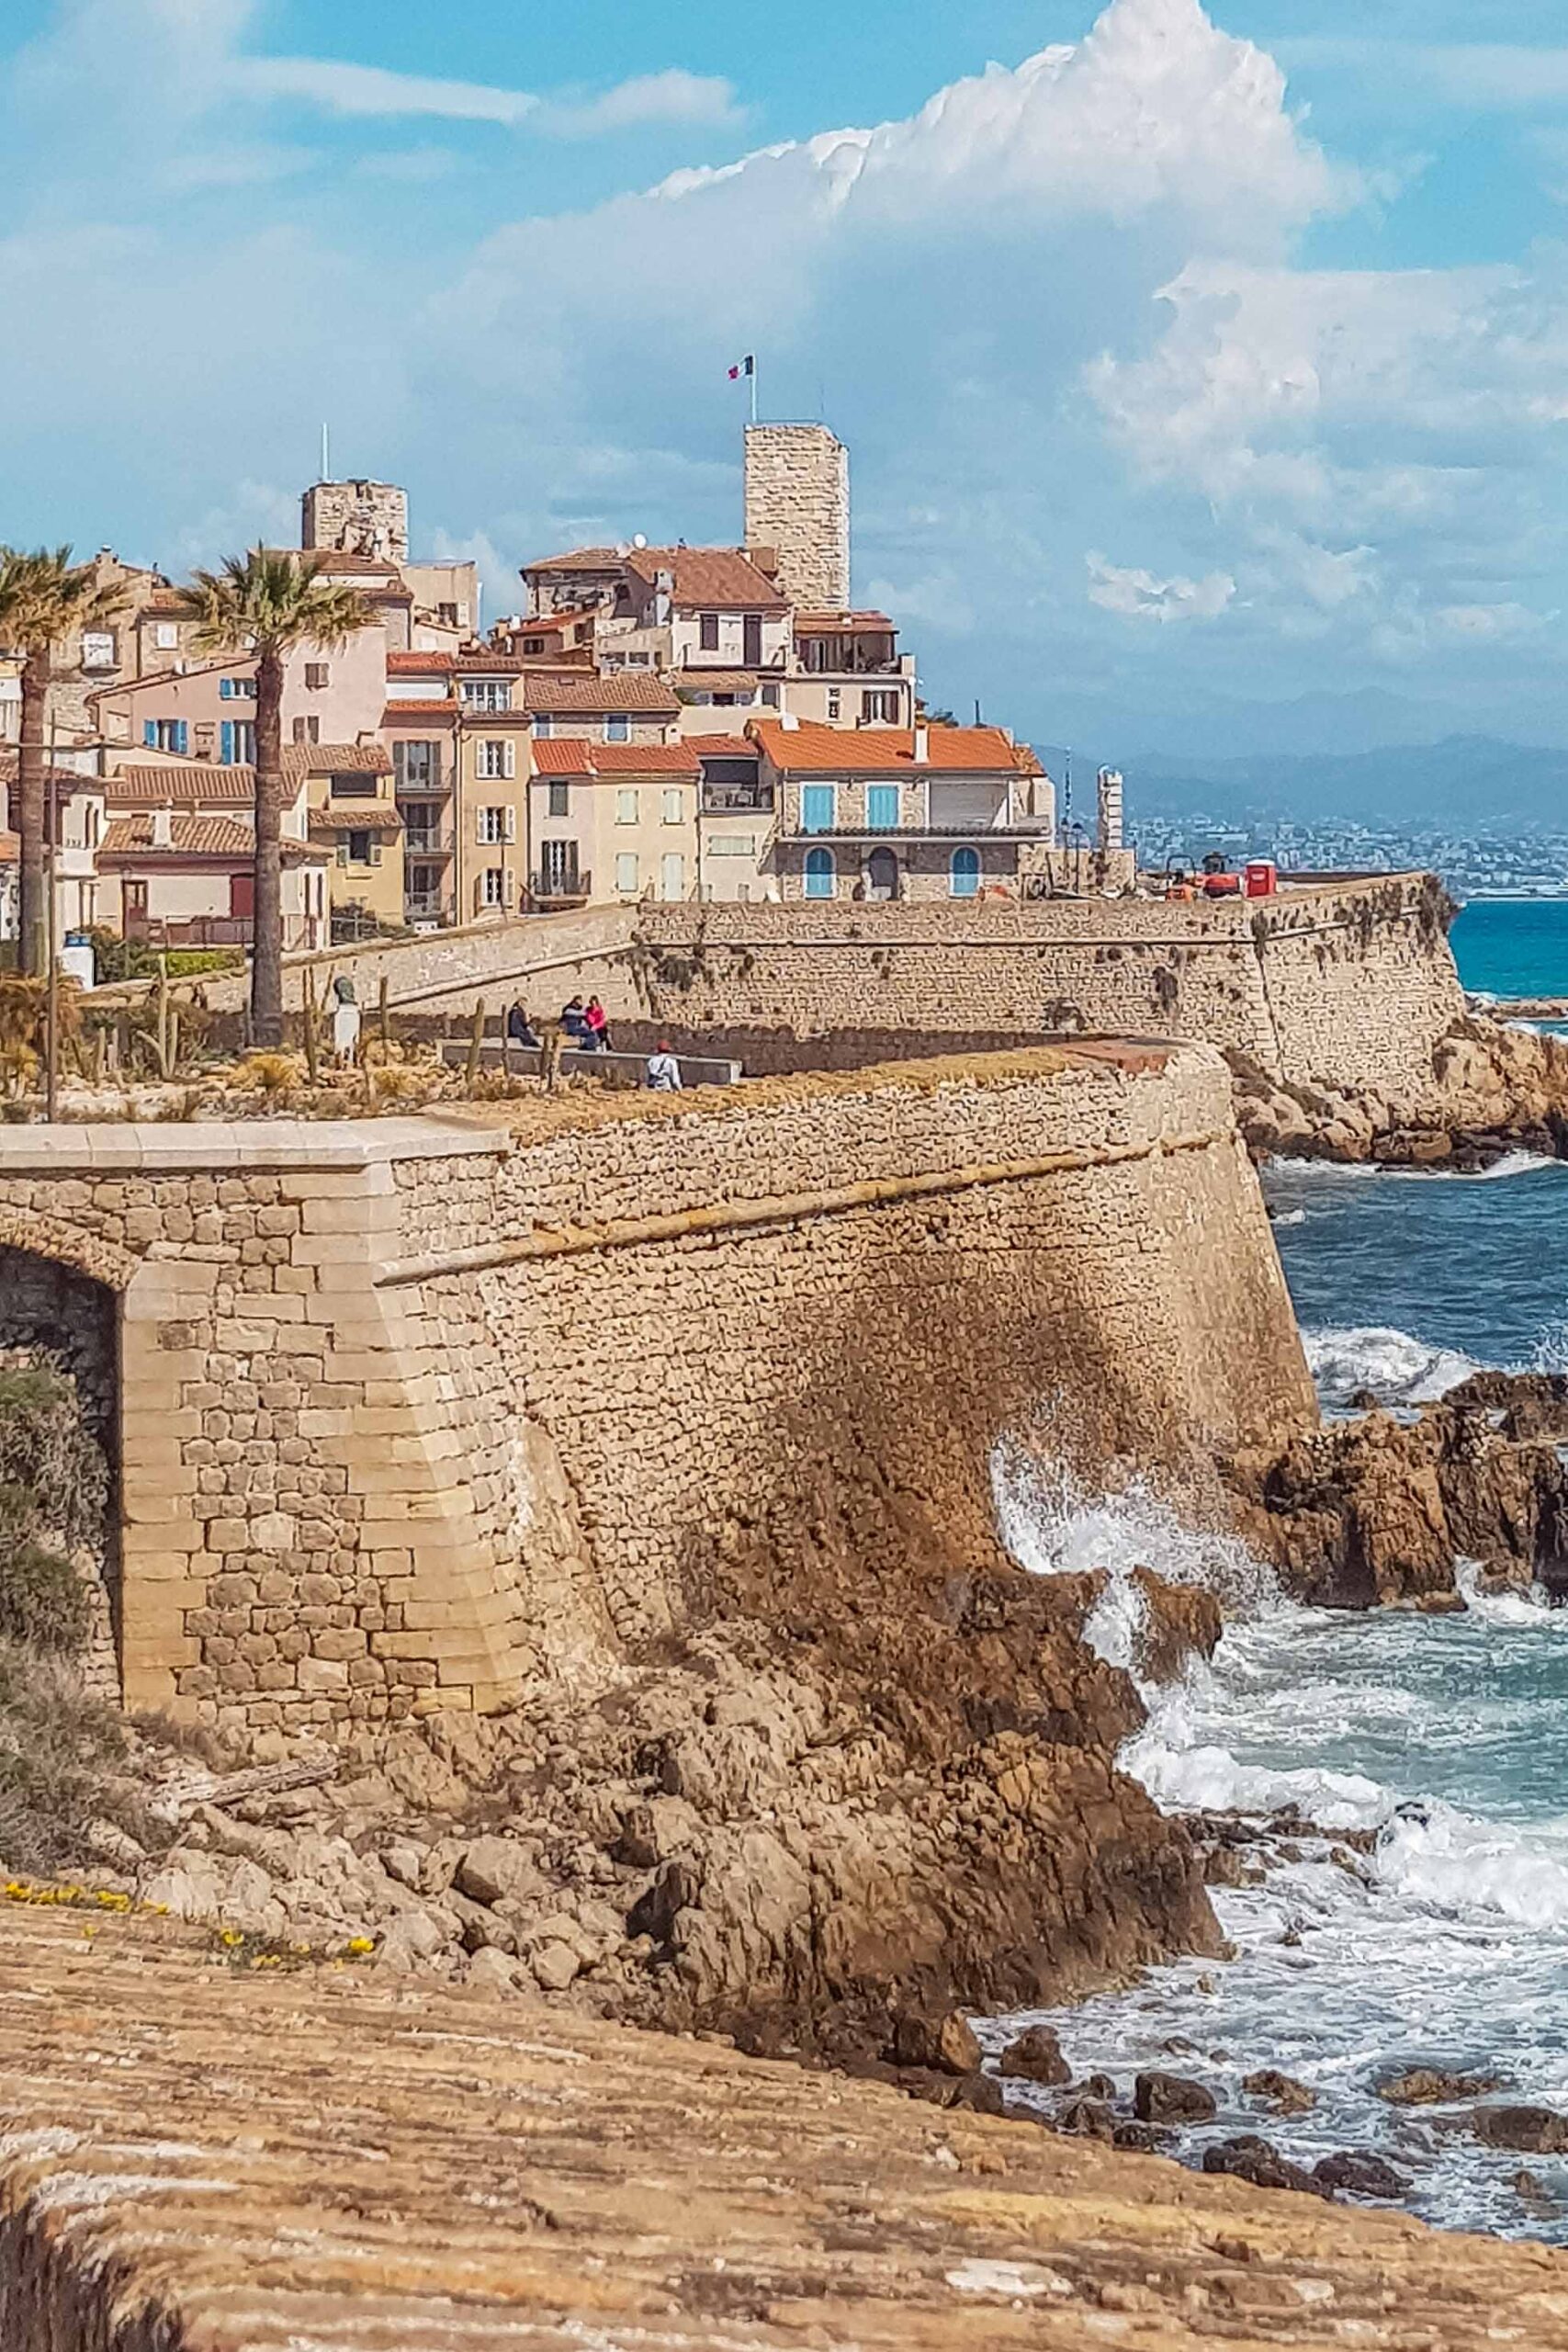 View of the Old Town of Antibes featuring battlements and afar view of the castle-museum Picasso tower in Antibes, France